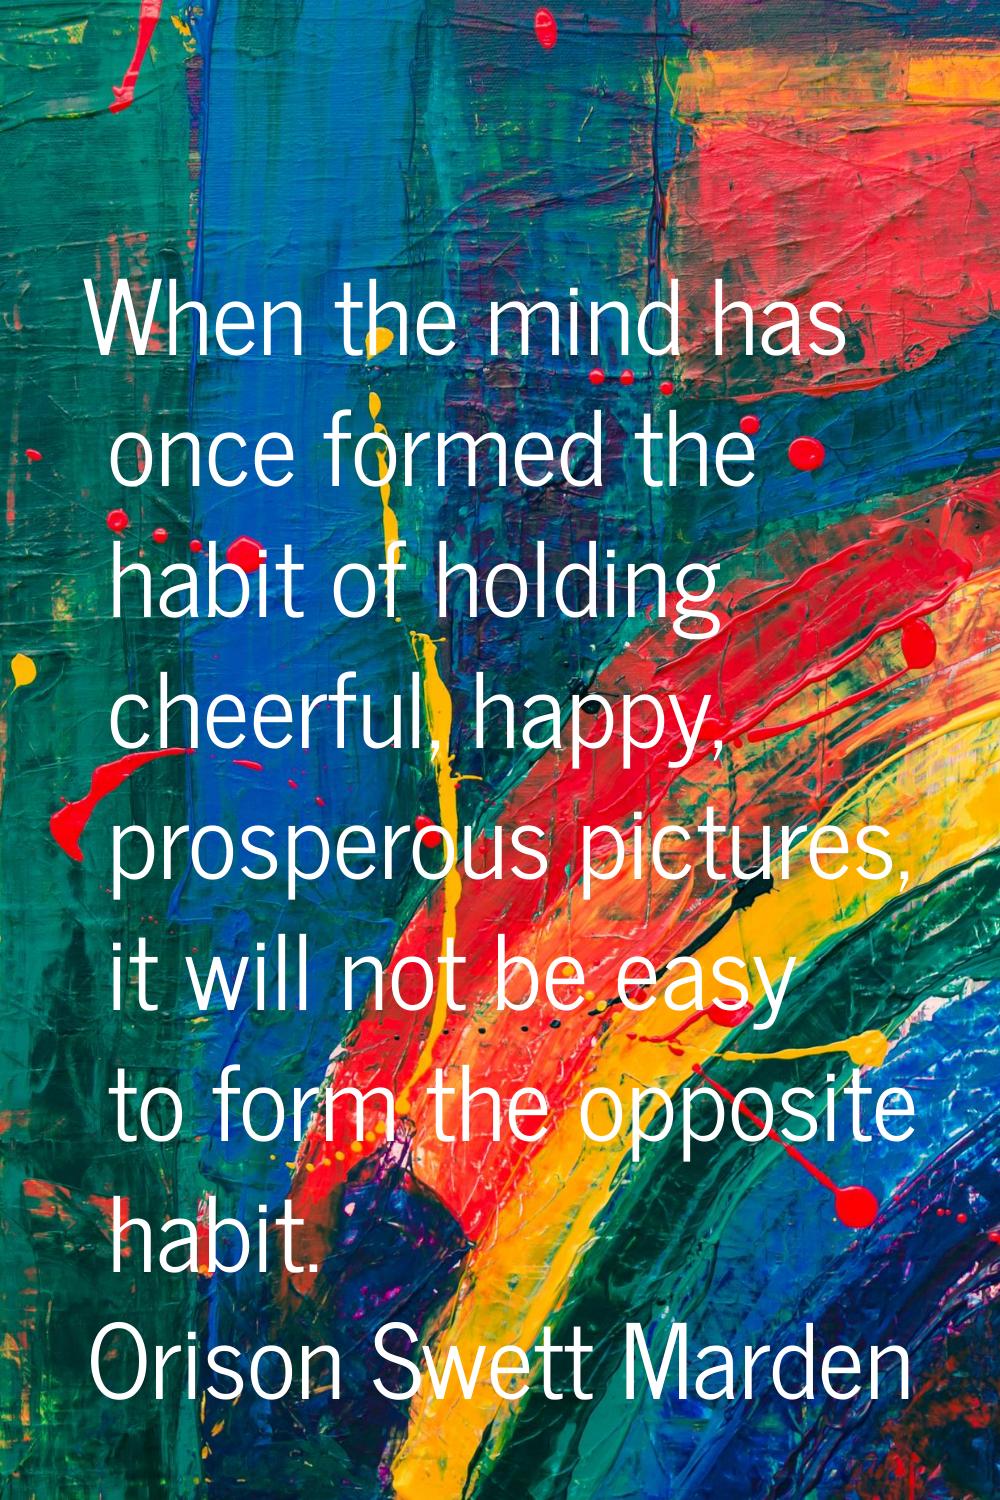 When the mind has once formed the habit of holding cheerful, happy, prosperous pictures, it will no